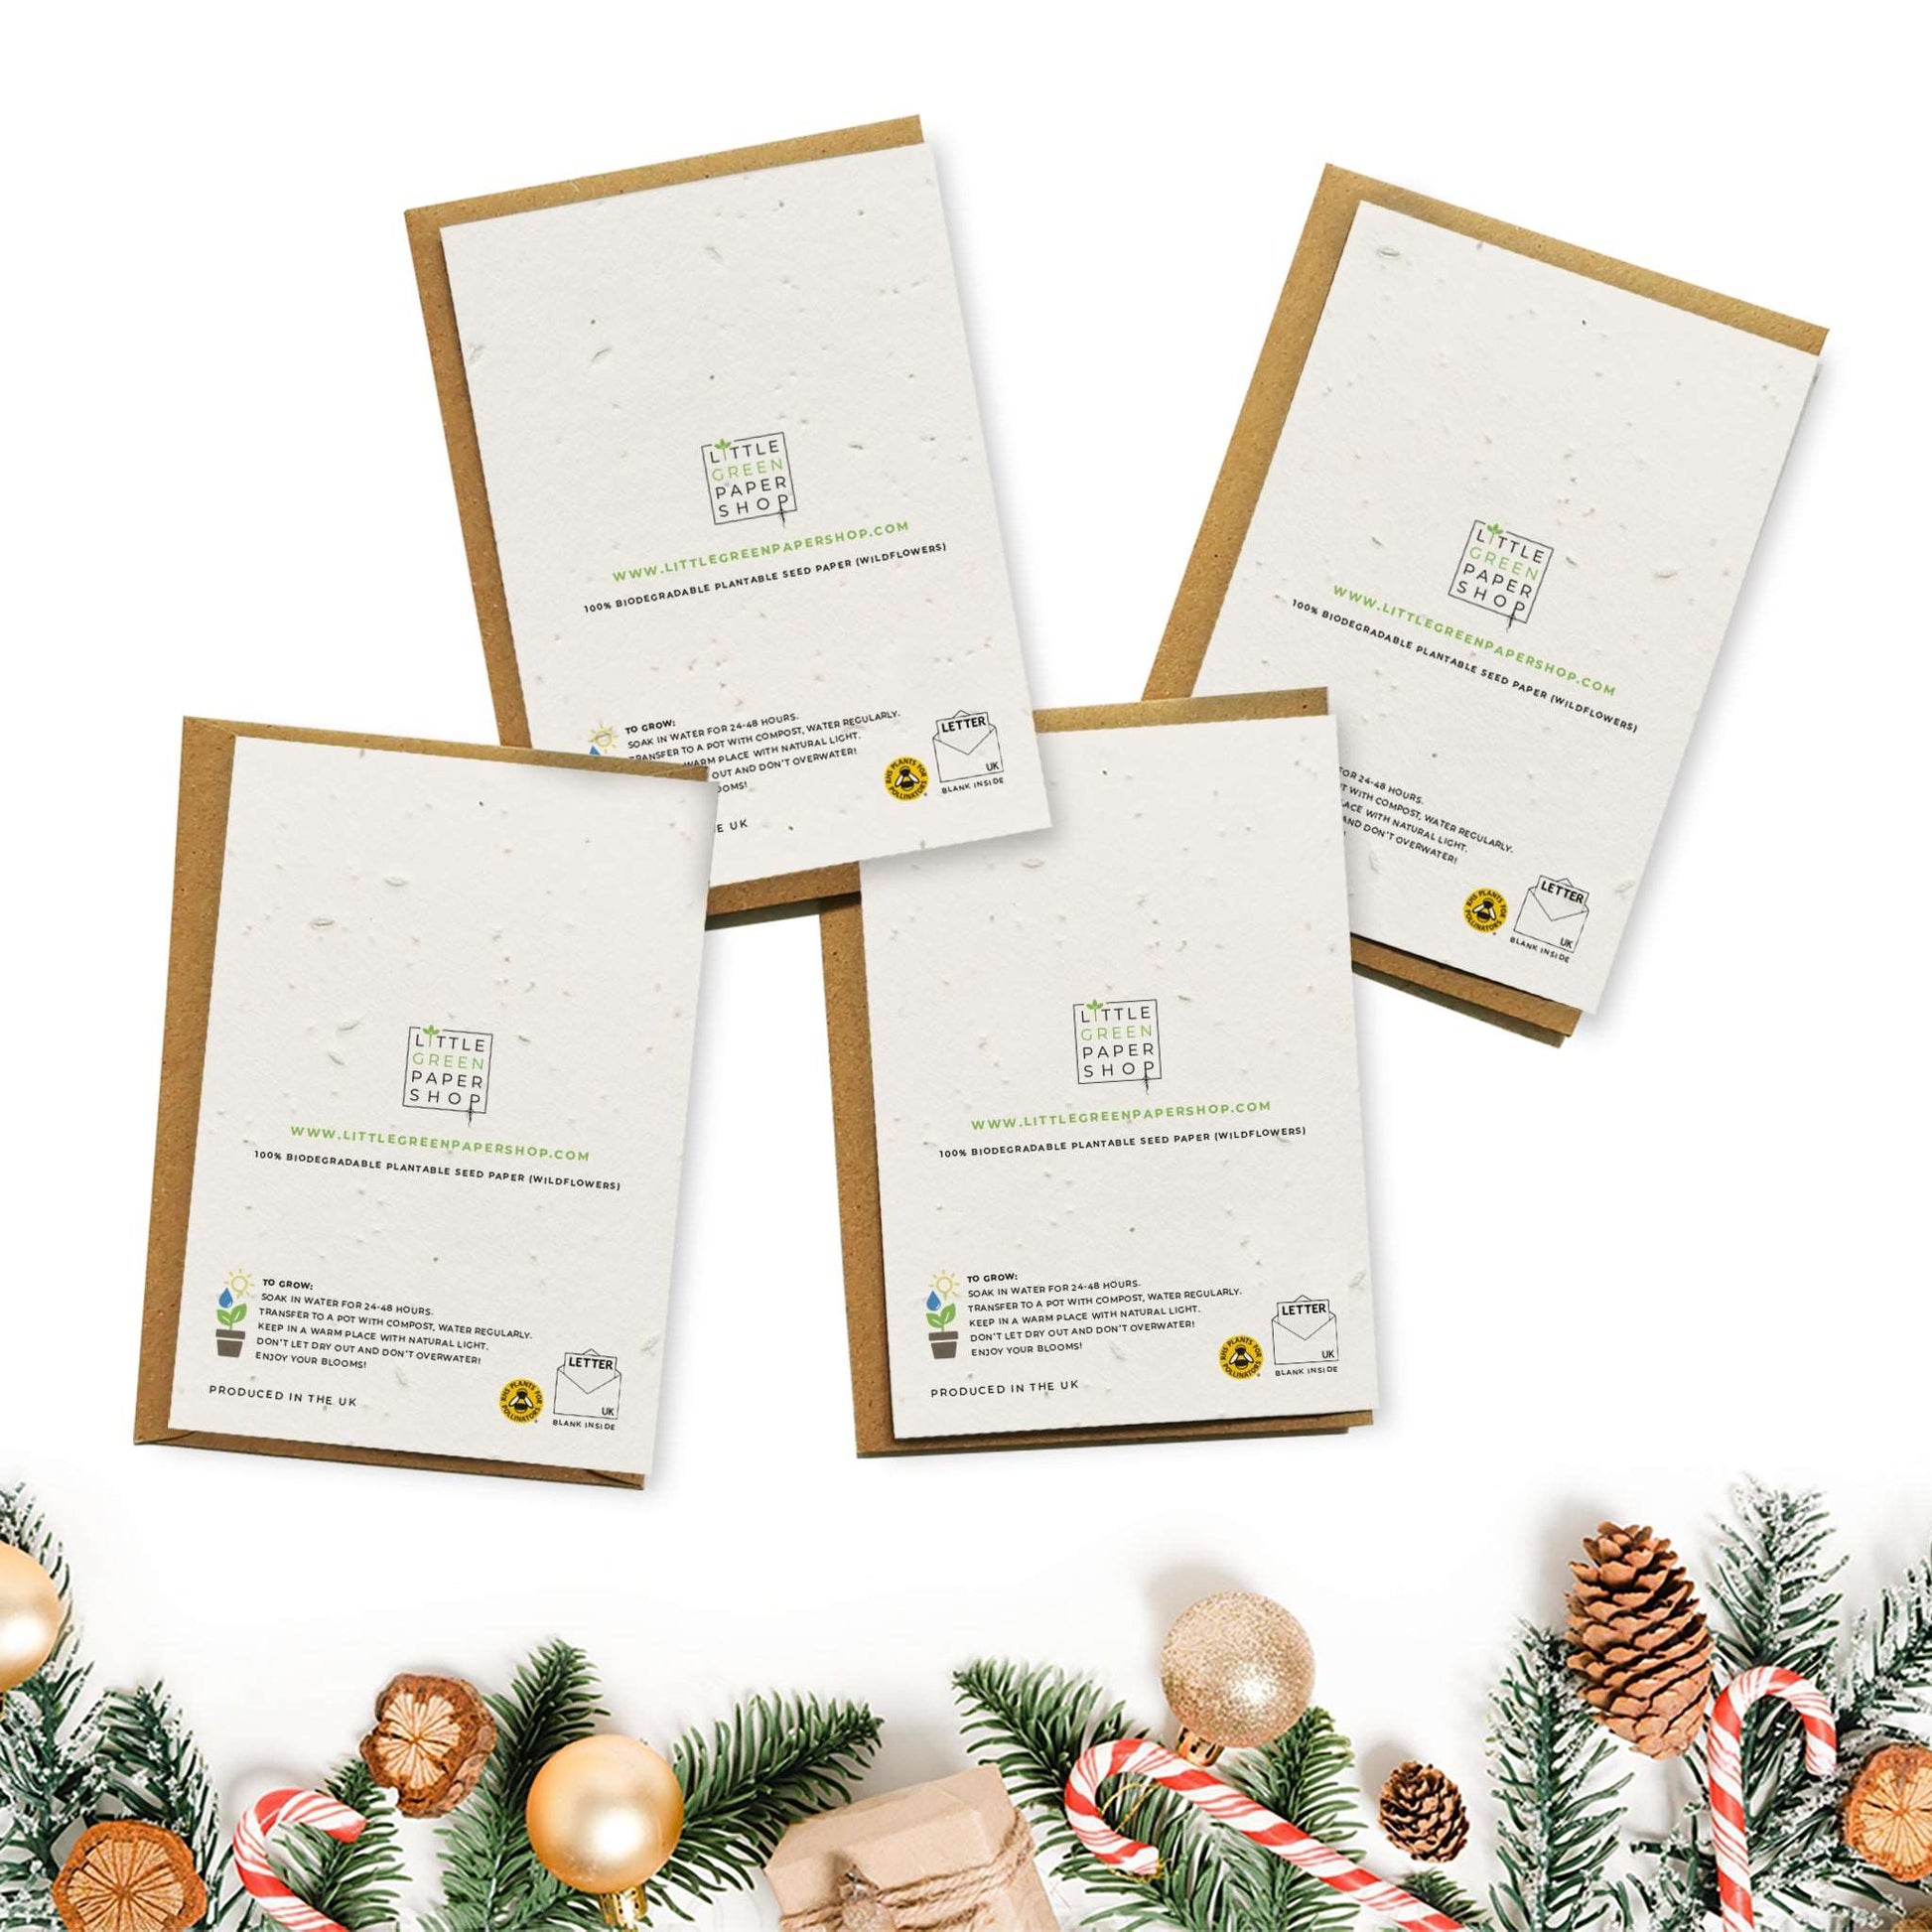 Plantable Seed Paper Christmas Cards 4-Pack - Starry Wreath Greeting Card Little Green Paper Shop